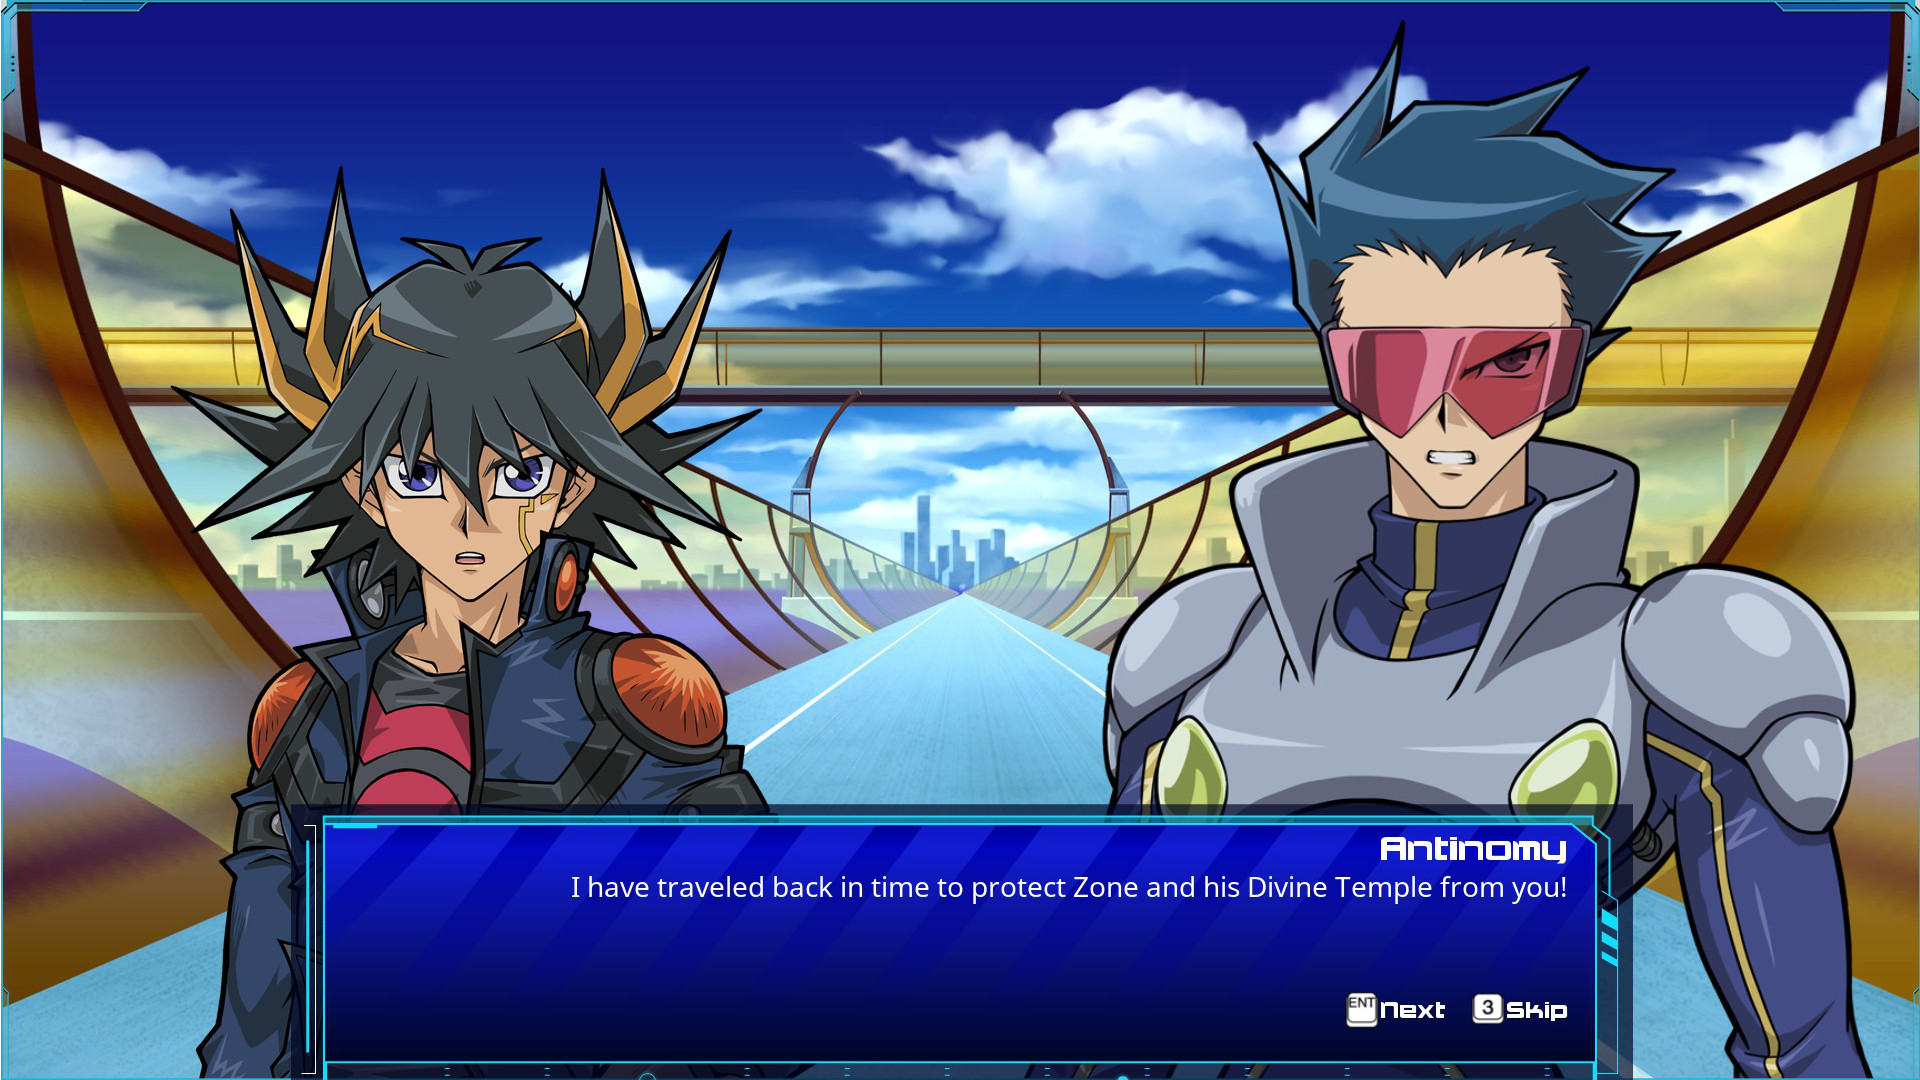 Yu-Gi-Oh! - 5D’s For the Future DLC Steam CD Key 1.04 usd